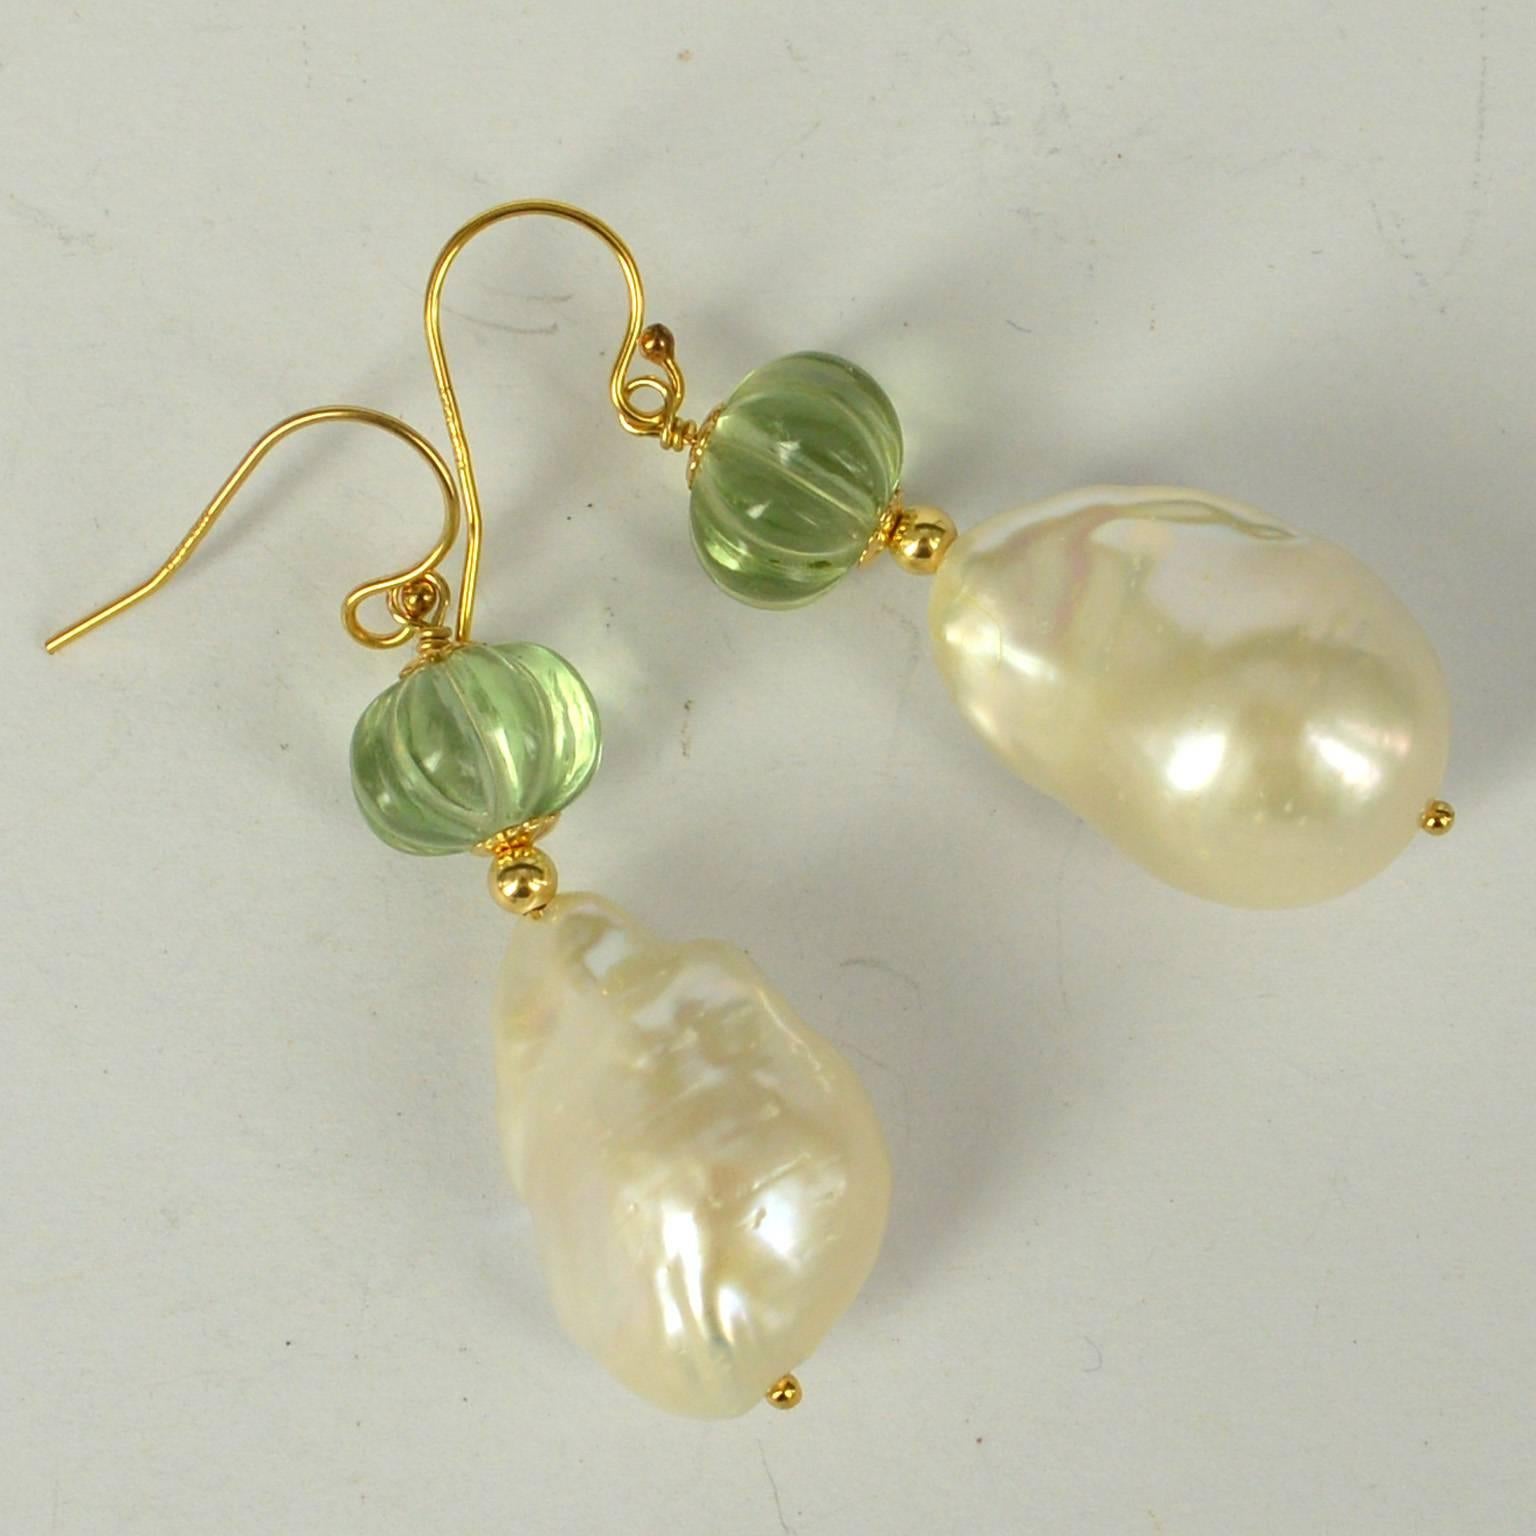 Stunning hand carved melon Shaped Green Amethyst with a high Quality Baroque Fresh Water Pearl.
Green Amethyst Beads measure 10x8mm with a 15x23mm Pearl.
All findings are 14k Gold Filled
length of Earrings is 49mm